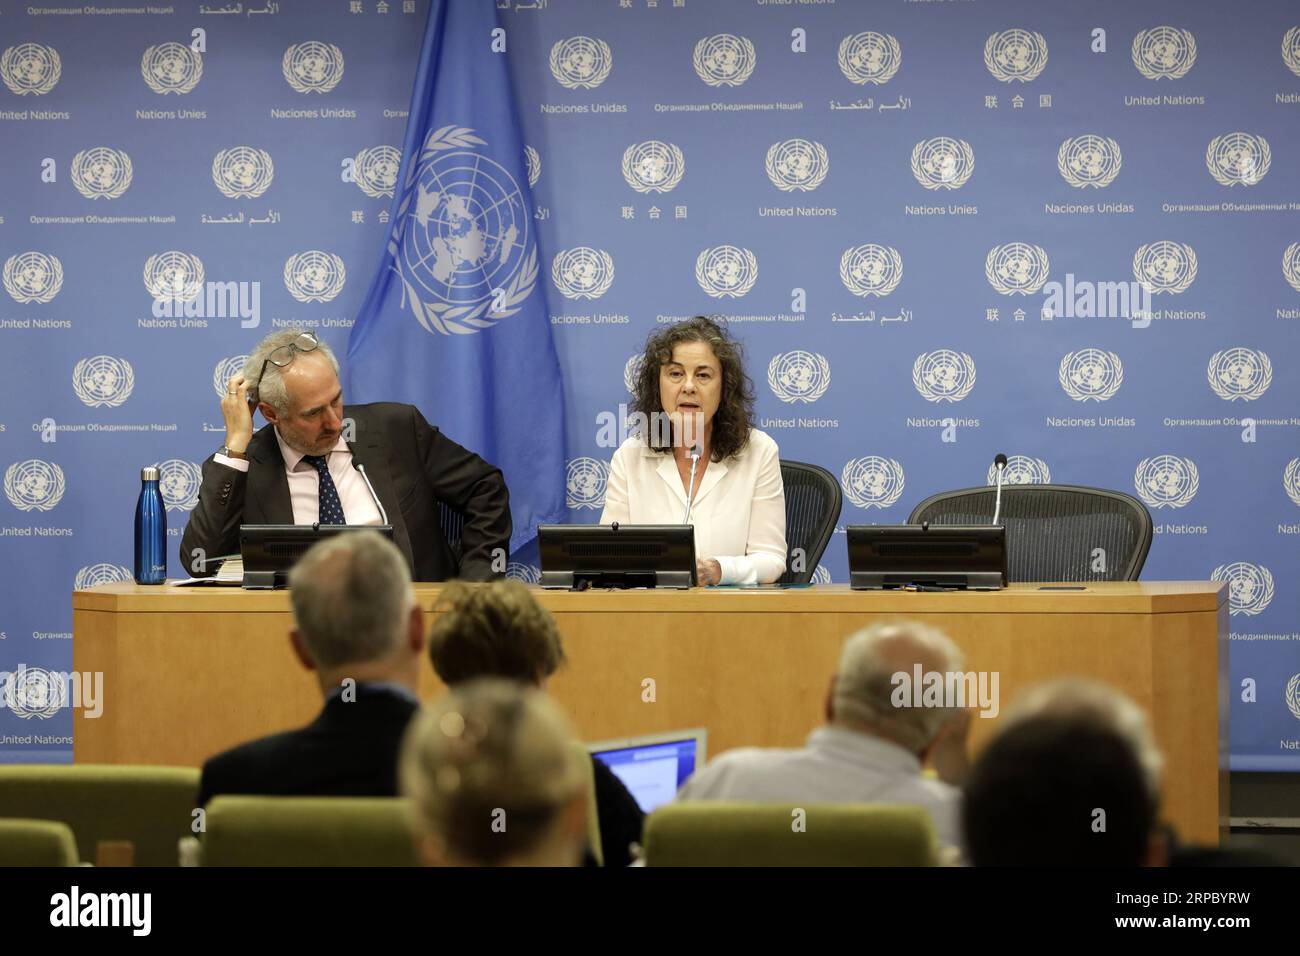 (190619) -- UNITED NATIONS, June 19, 2019 -- Ninette Kelley (R), Director of the New York Office of the United Nations High Commissioner for Refugees (UNHCR), briefs journalists at the UN headquarters in New York, June 19, 2019. Almost 70.8 million people were forcibly displaced in 2018, with a 2.3-million increase compared to the previous year, according to the annual Global Trends report released ahead of the World Refugee Day by the United Nations Refugee Agency. ) UN-UNHCR-PRESS BRIEFING LixMuzi PUBLICATIONxNOTxINxCHN Stock Photo